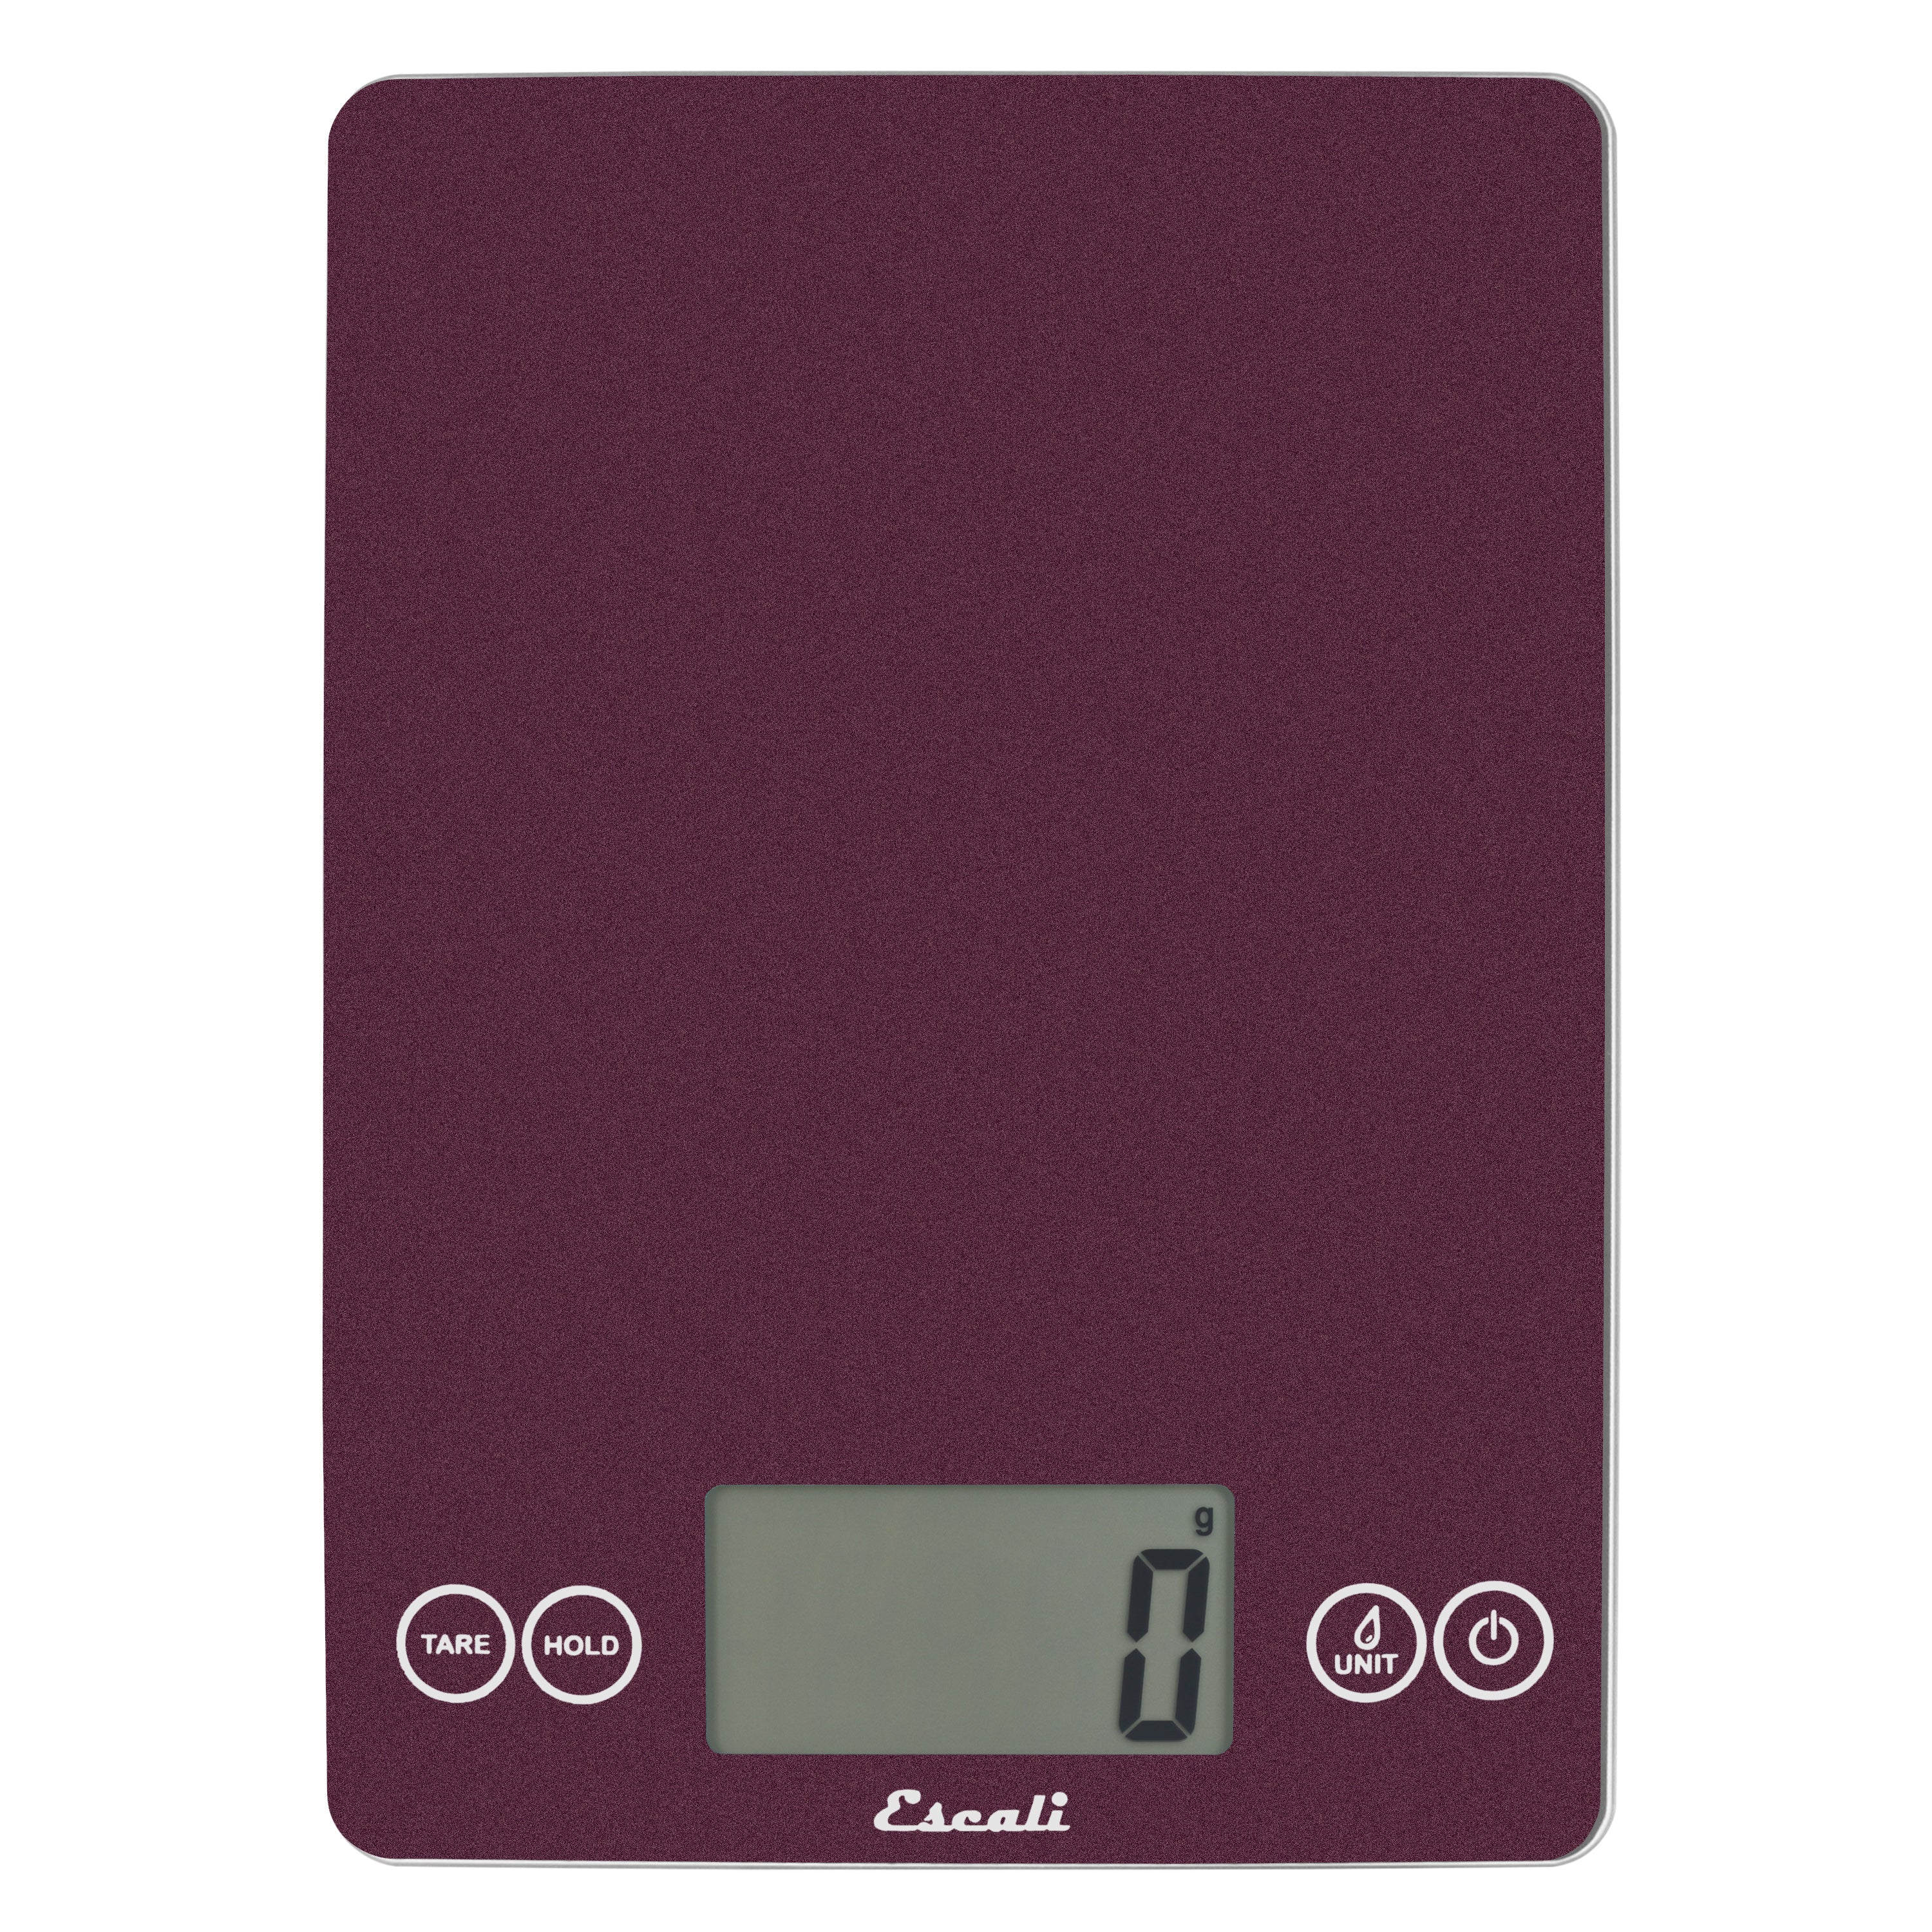 A photo of a purple night color ARTI Digital Kitchen Scale on a white background.